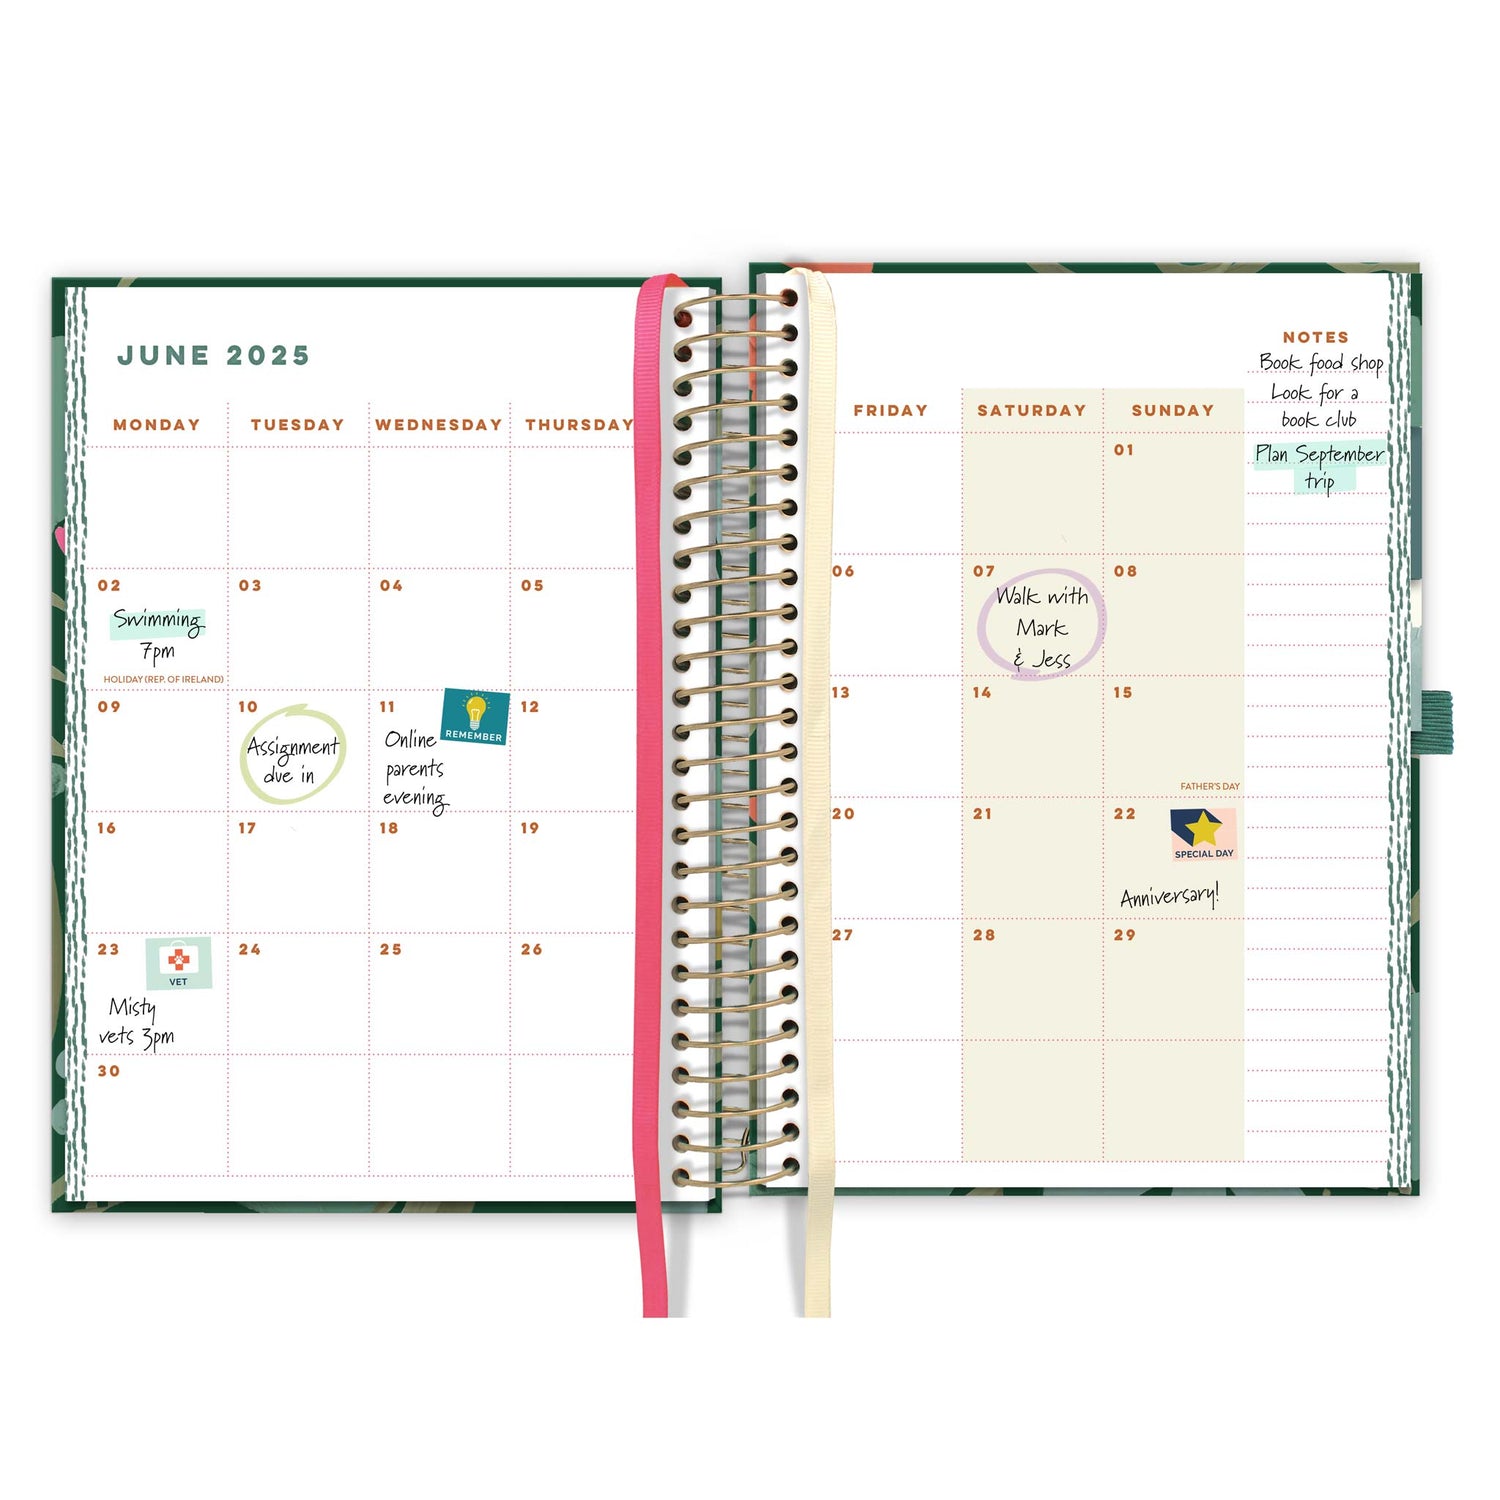 An open page diary spread with a month to view calendar with appointments and stickers and white and pink page markers